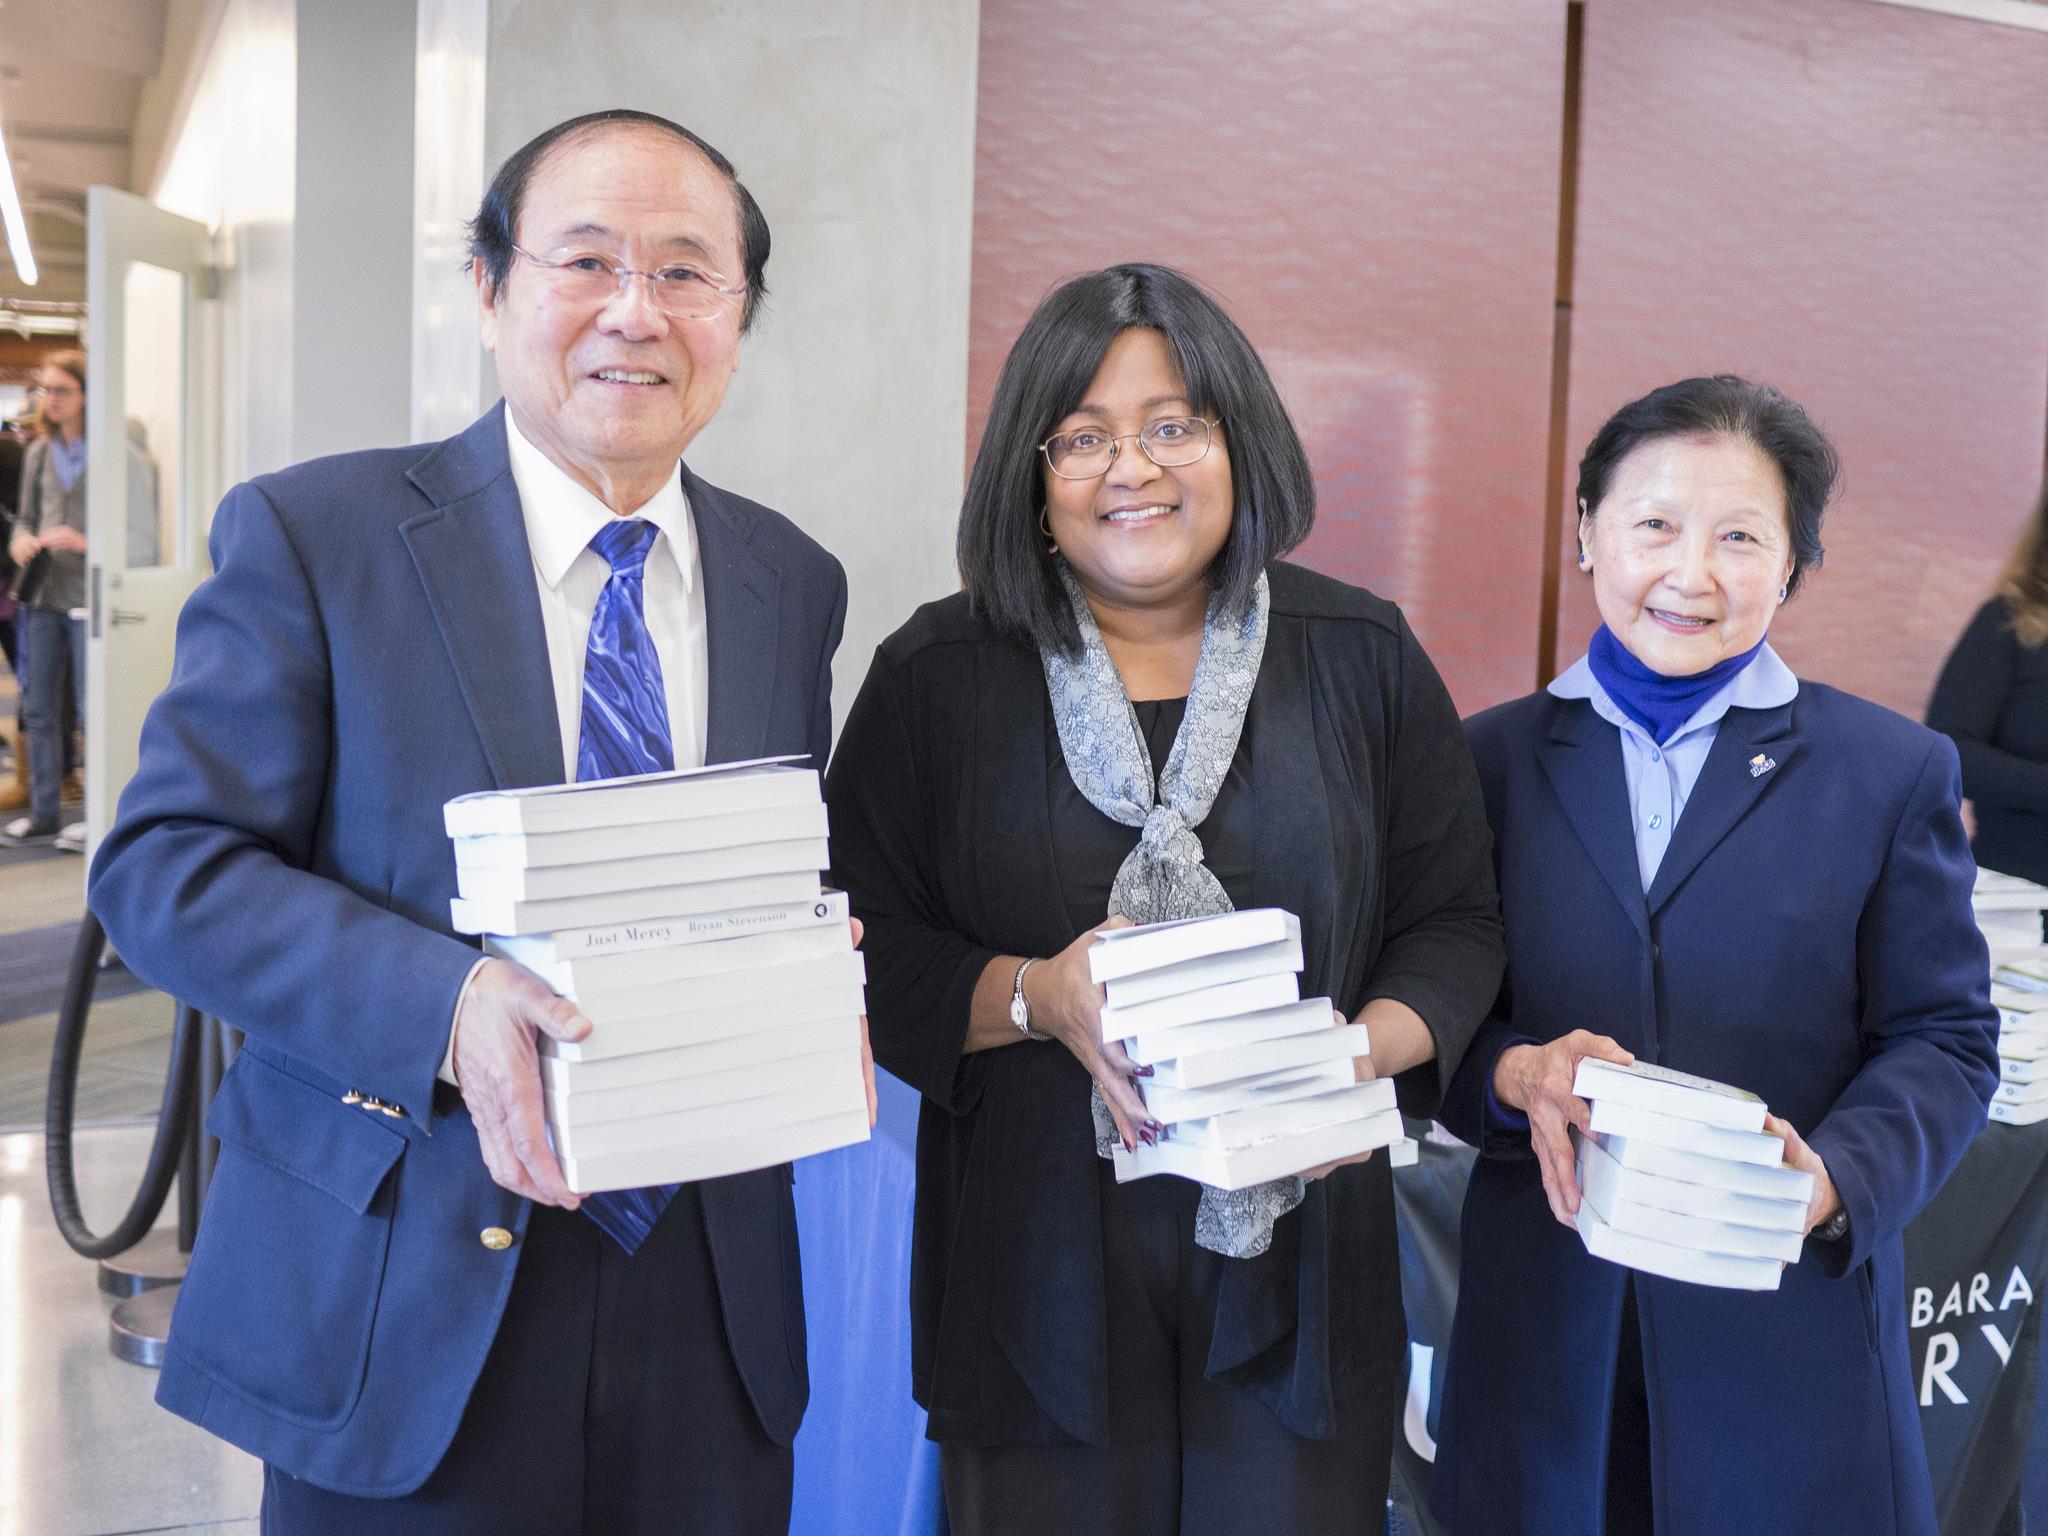 UCSB Chancellor Henry Yang, University Librarian Denise Stephens, and Dilling Yang pass out books at the 2016 UCSB Reads book giveaway. Credit: UCSB Library